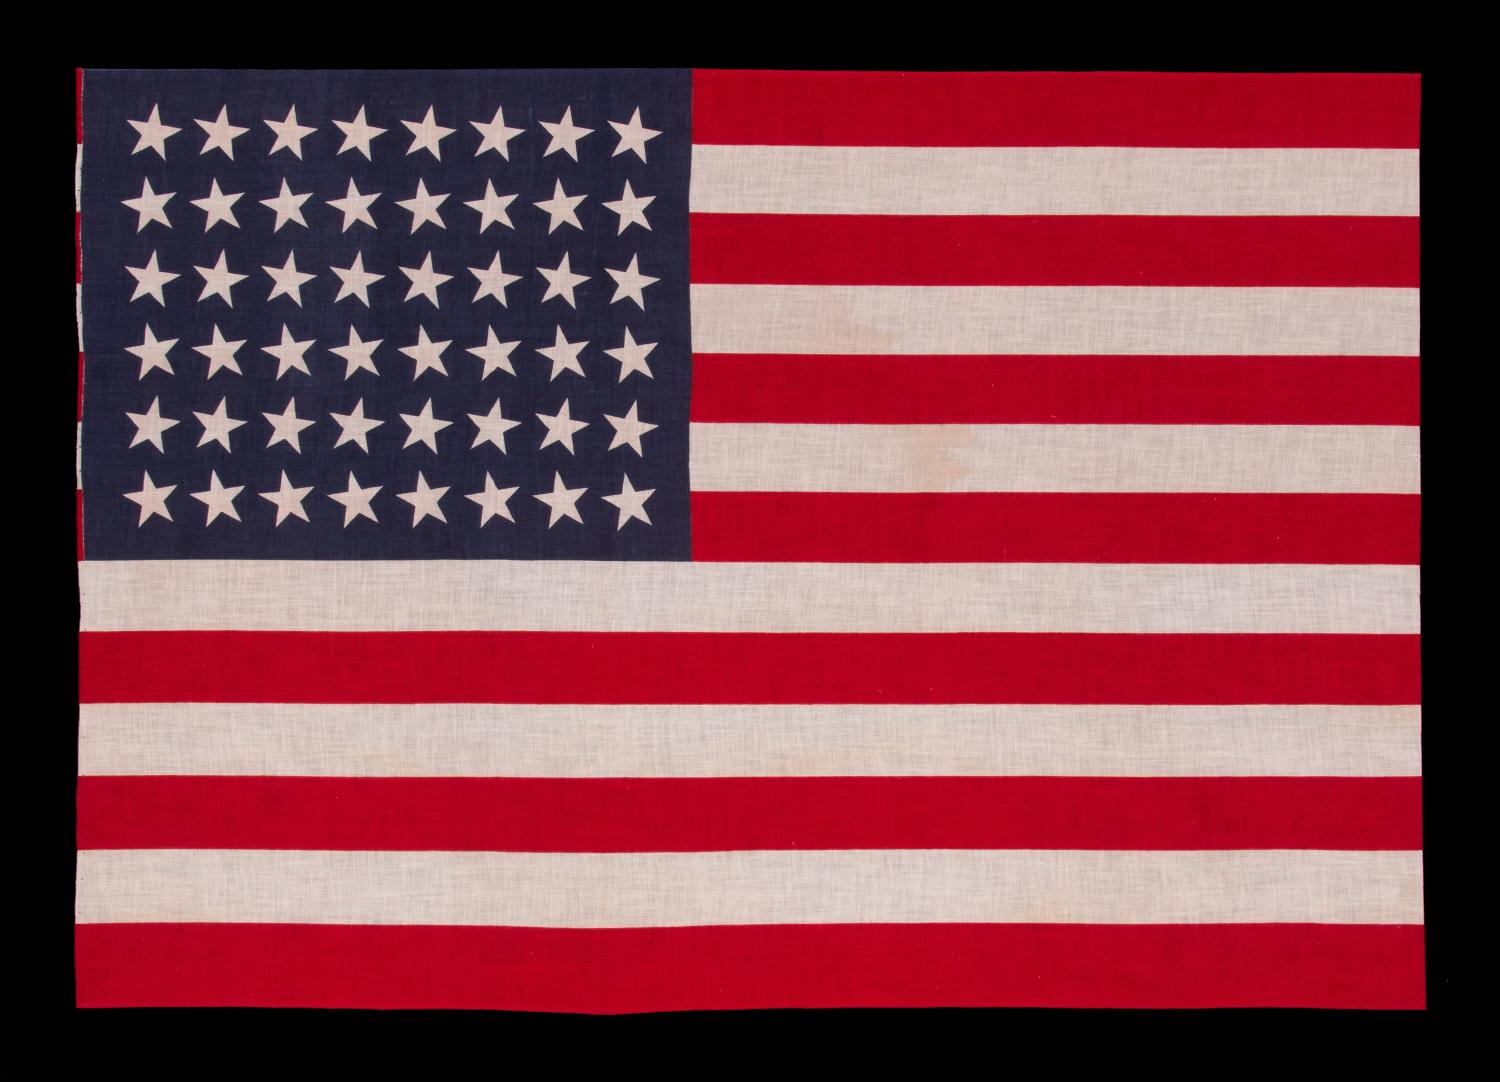 48 STARS IN DANCING ROWS, A RARE VARIETY OF ANTIQUE AMERICAN PARADE FLAG IN A LARGE SCALE, 1912-1918 OR PERHAPS EARLIER, ARIZONA & NEW MEXICO STATEHOOD:

In 1912, President Taft passed an executive order that dictated, for the first time, an